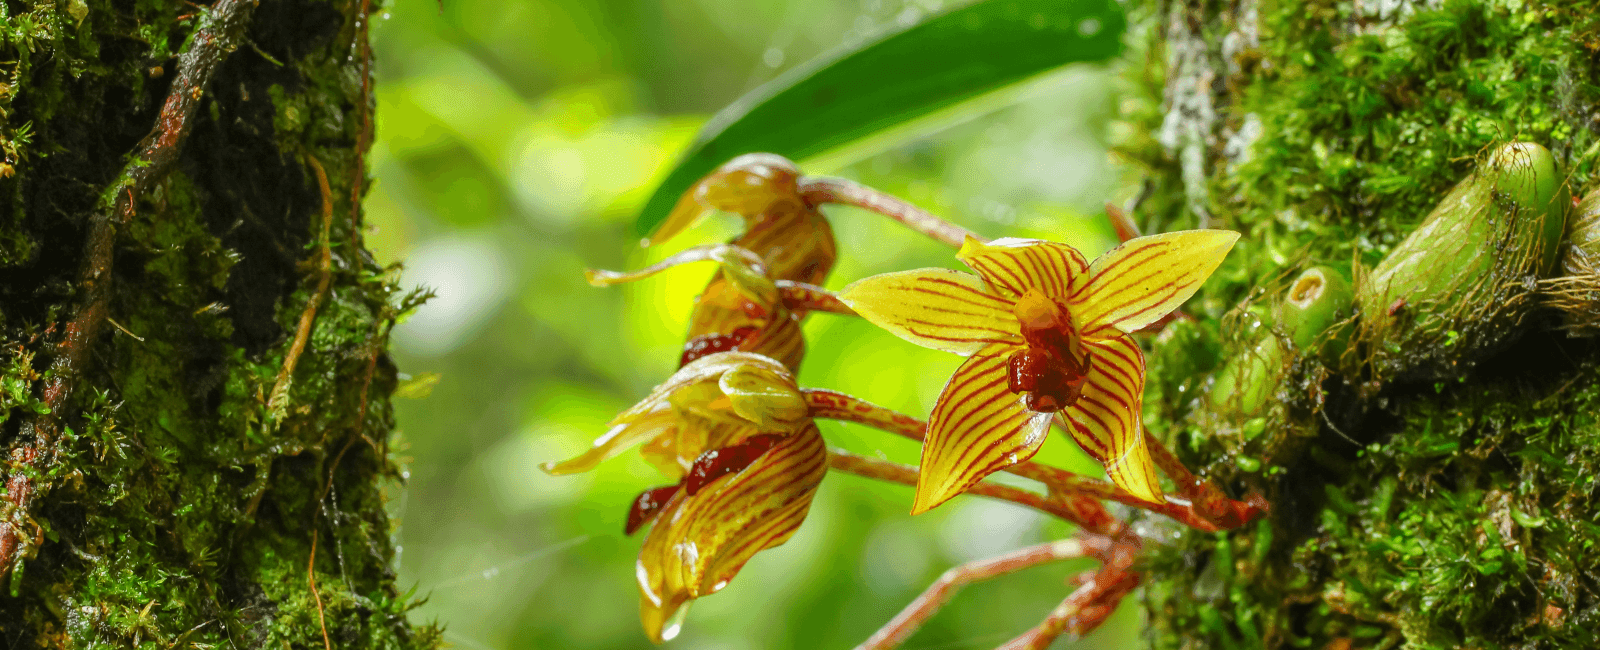 The Symbiotic Relationship Between Fungi and Orchids Could Help Save Endangered Populations